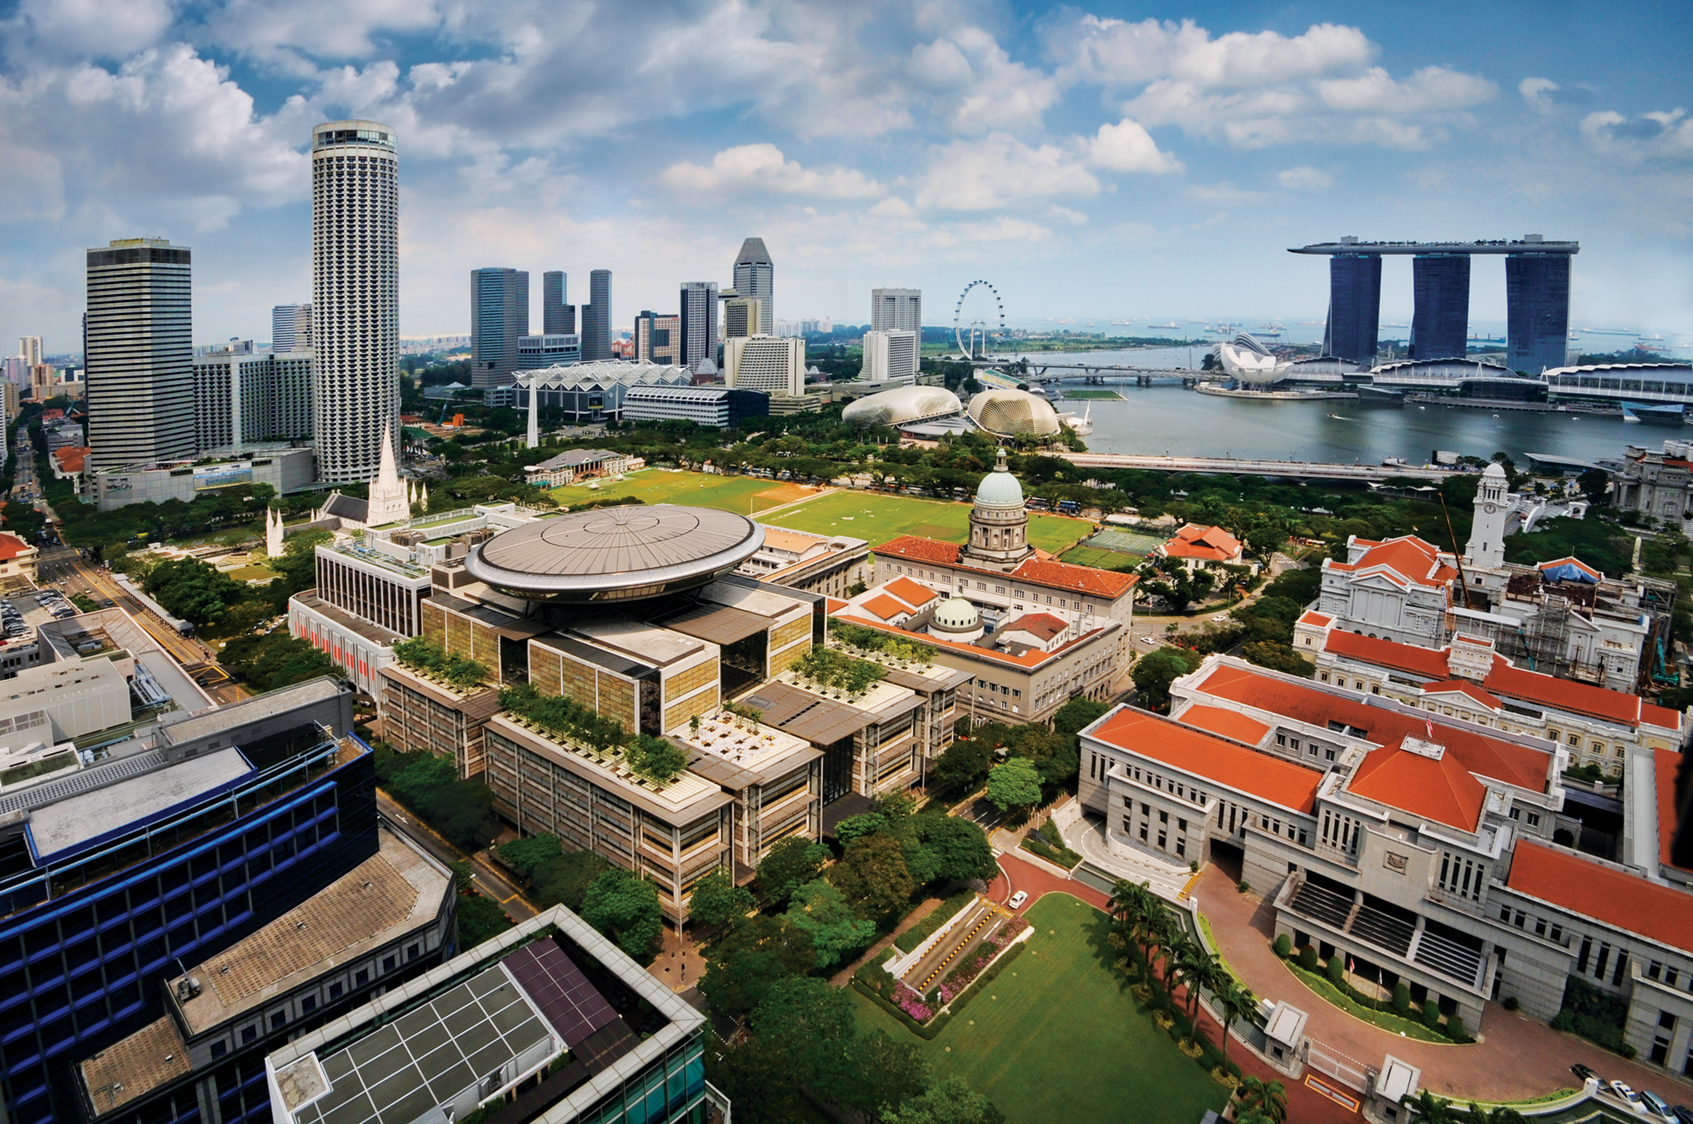 Aerial view of the Civic District, Singapore - 20110224.jpg